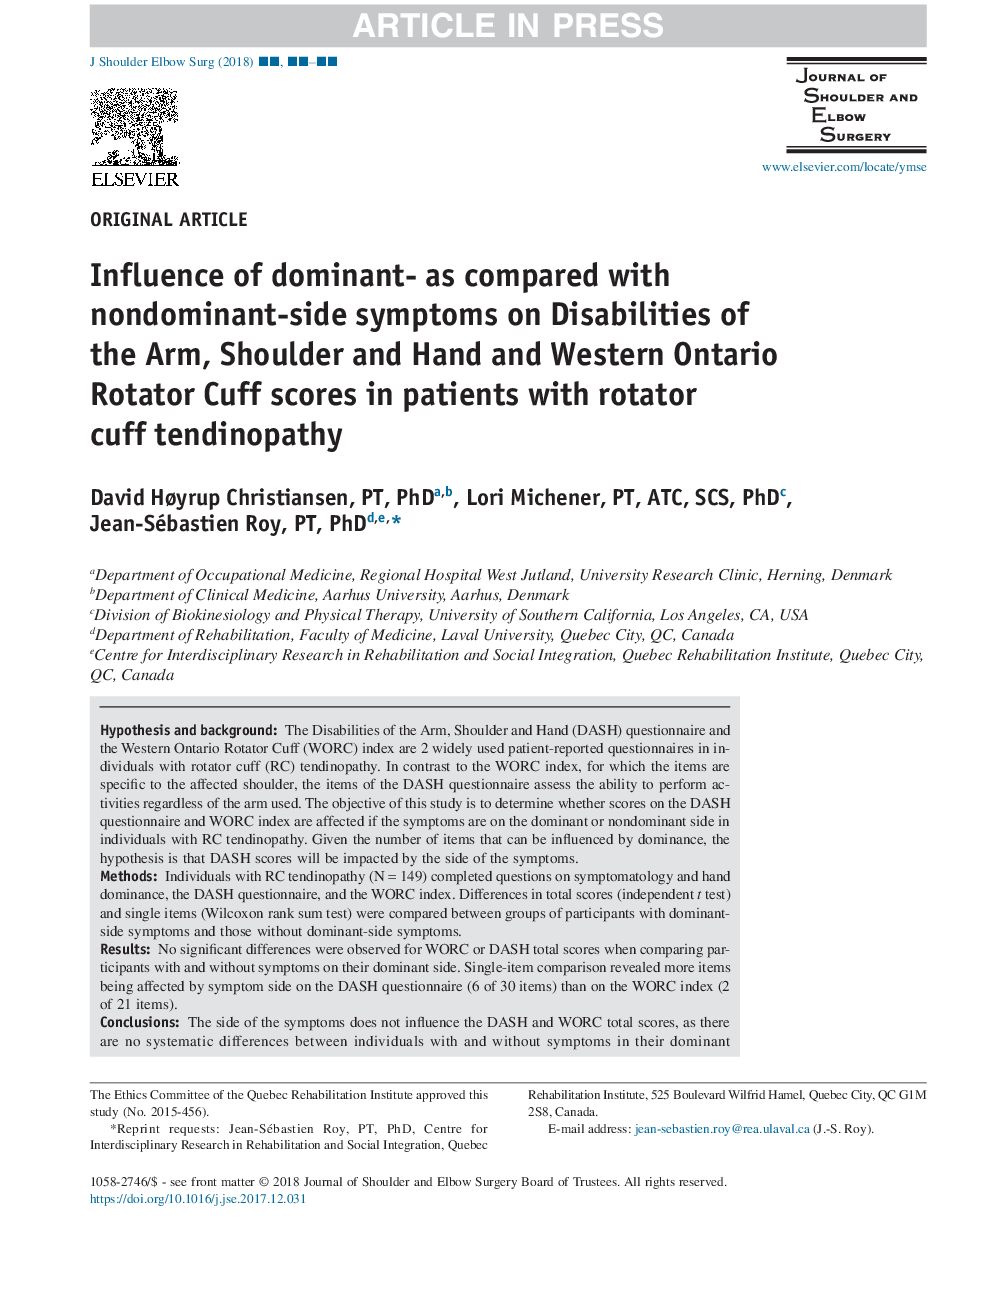 Influence of dominant- as compared with nondominant-side symptoms on Disabilities of the Arm, Shoulder and Hand and Western Ontario Rotator Cuff scores in patients with rotator cuff tendinopathy